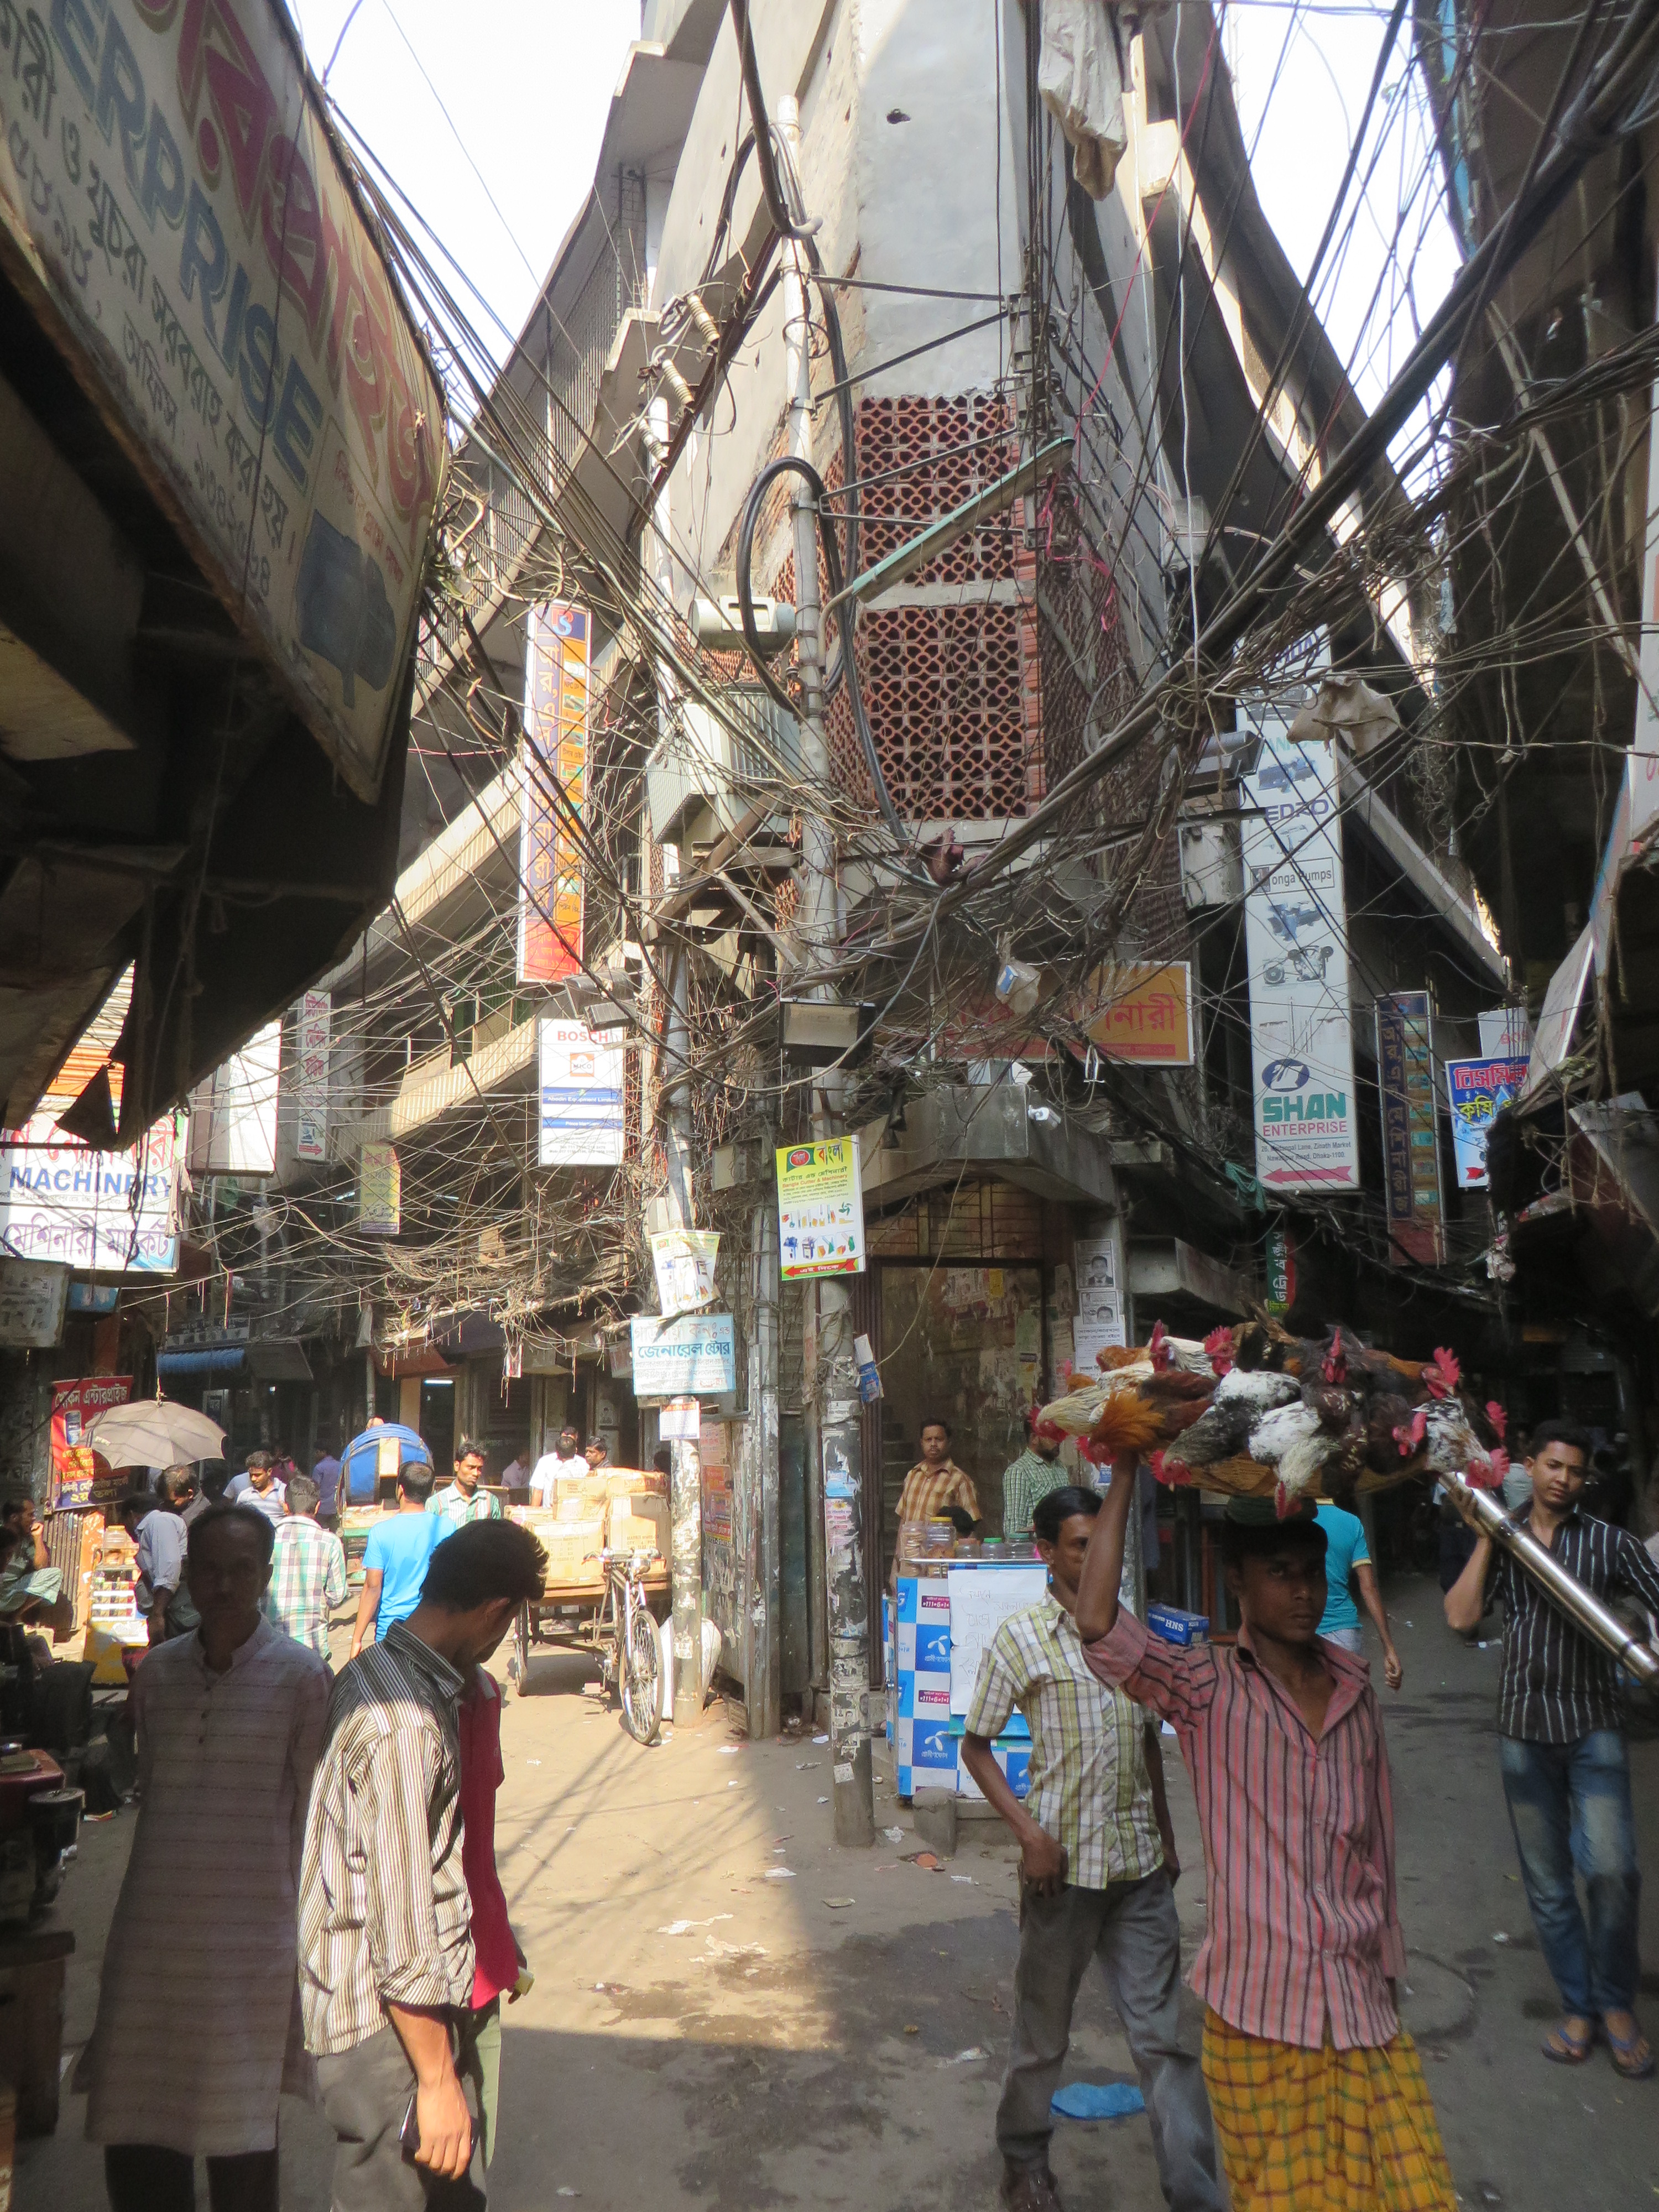 There's never a dull view in the alley ways of Dhaka